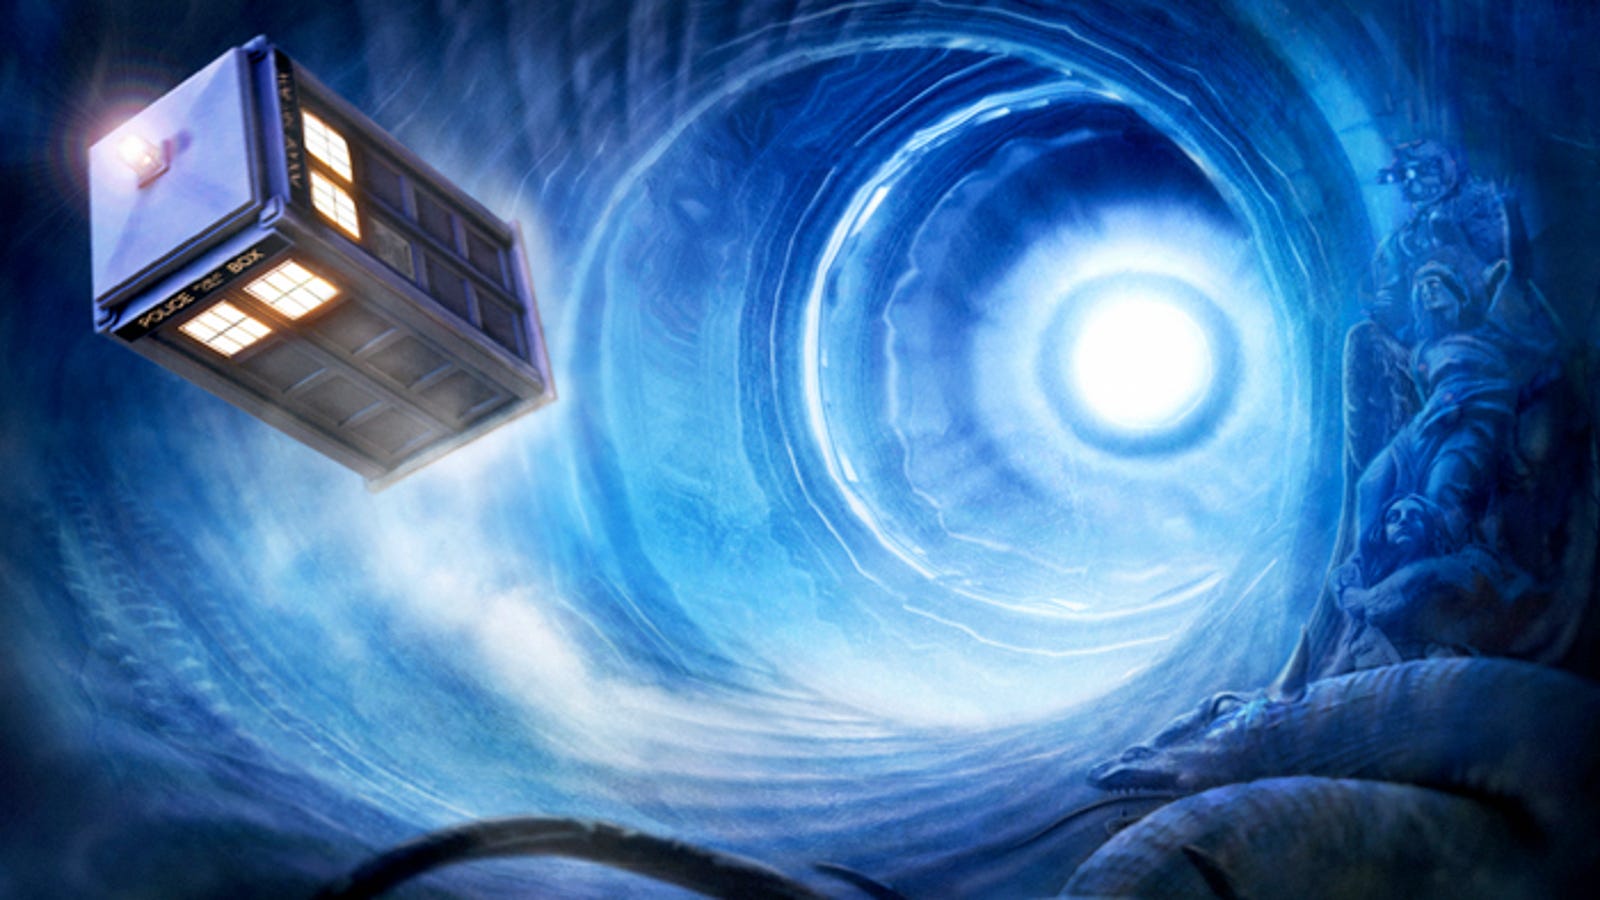 Doctor Who's mode of spacetime travel described in new physics paper